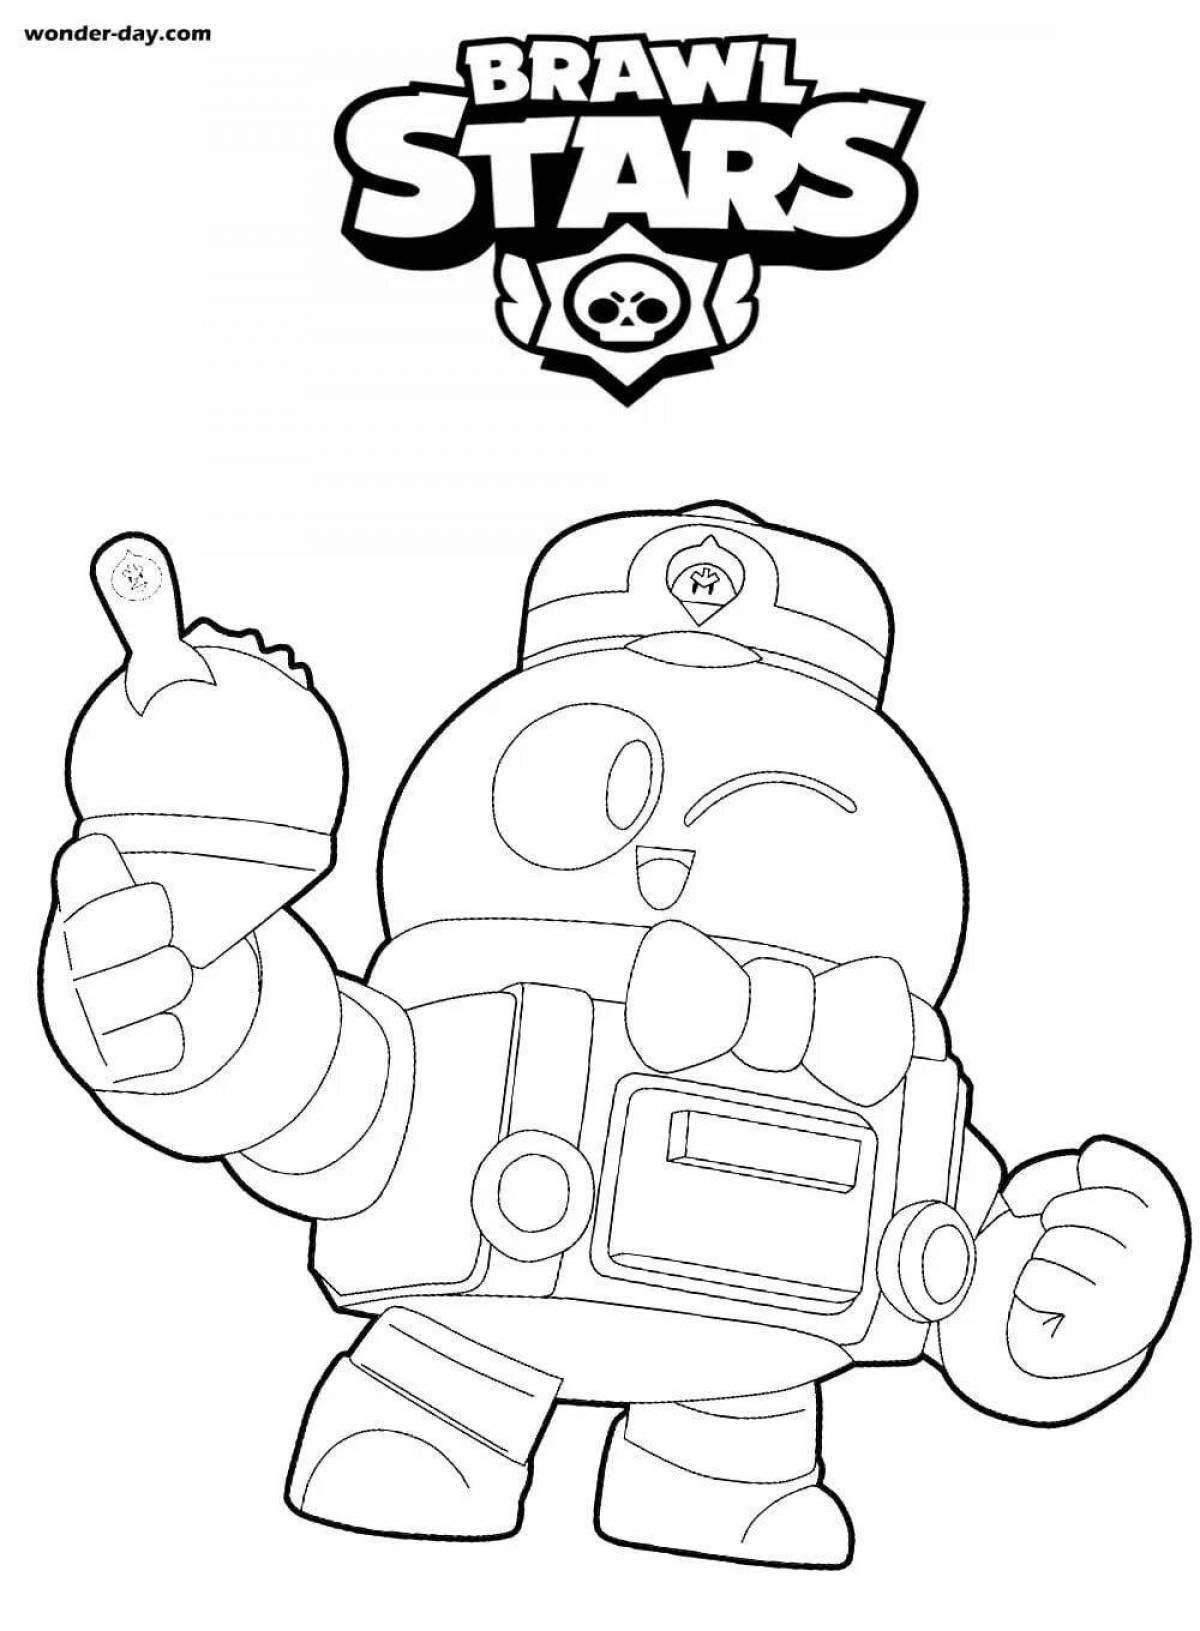 Star brawl glowing coloring pages